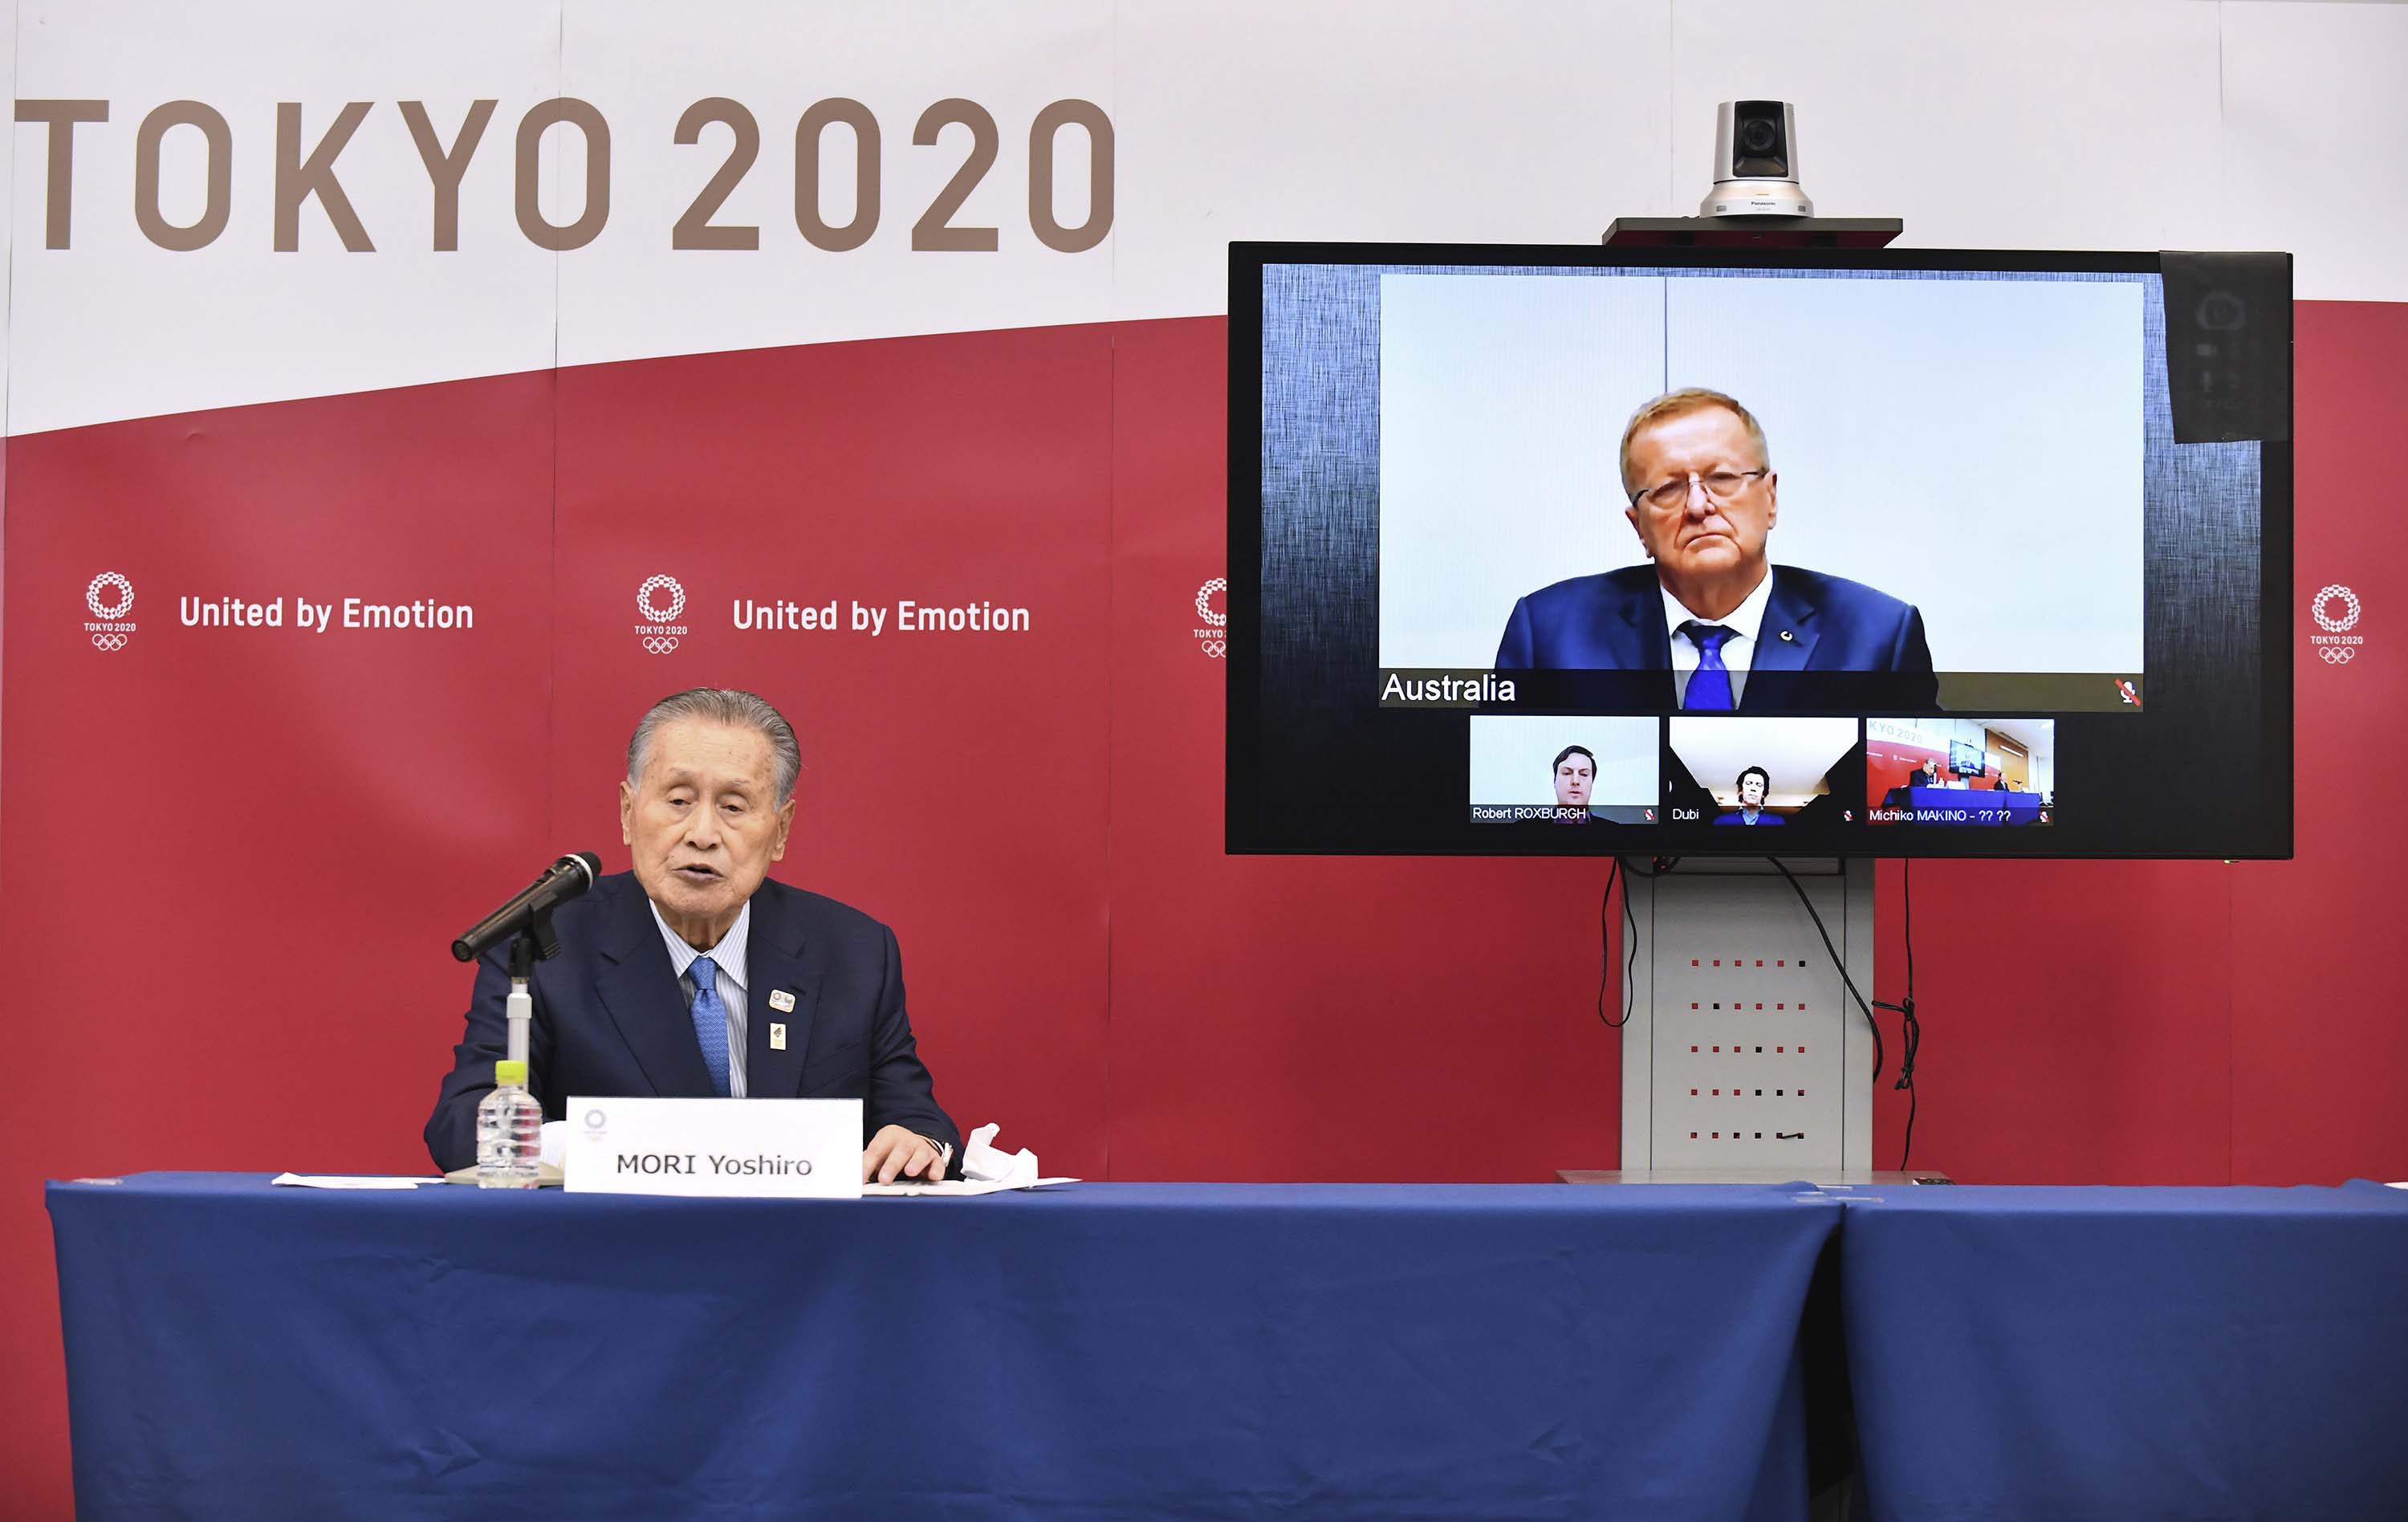 Tokyo 2020 Organizing Committee President Yoshiro Mori, left, speaks in teleconference with John Coates, chairman of the IOC's Coordination Commission for the Tokyo 2020 Olympic Games, in Tokyo on April 16.